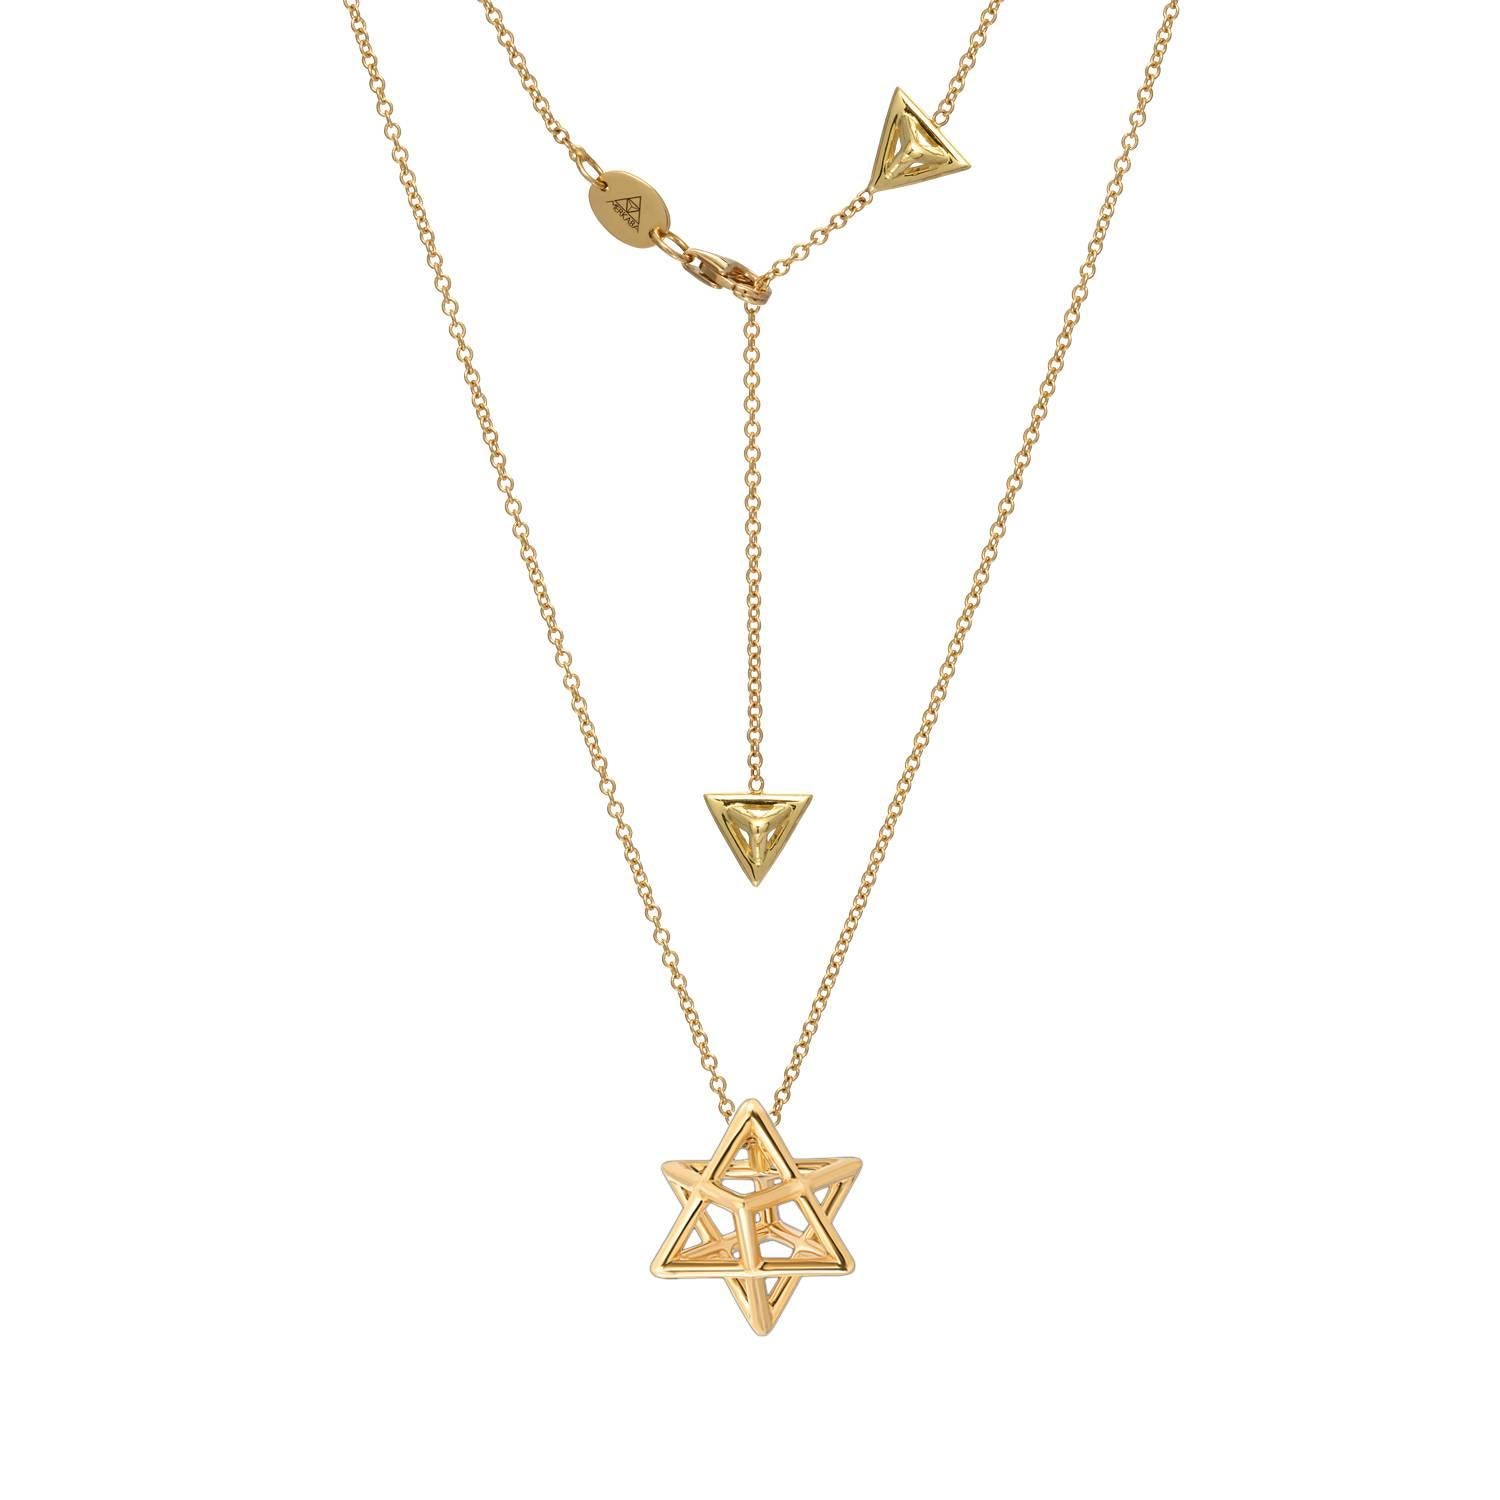 The Merkaba 18K yellow gold necklace, is a heirloom-quality, sacred geometric, three dimensional jewelry piece, highlighting superb attention to detail and extraordinary polish, symmetry and equilibrium. It suspends elegantly at the chest, measuring